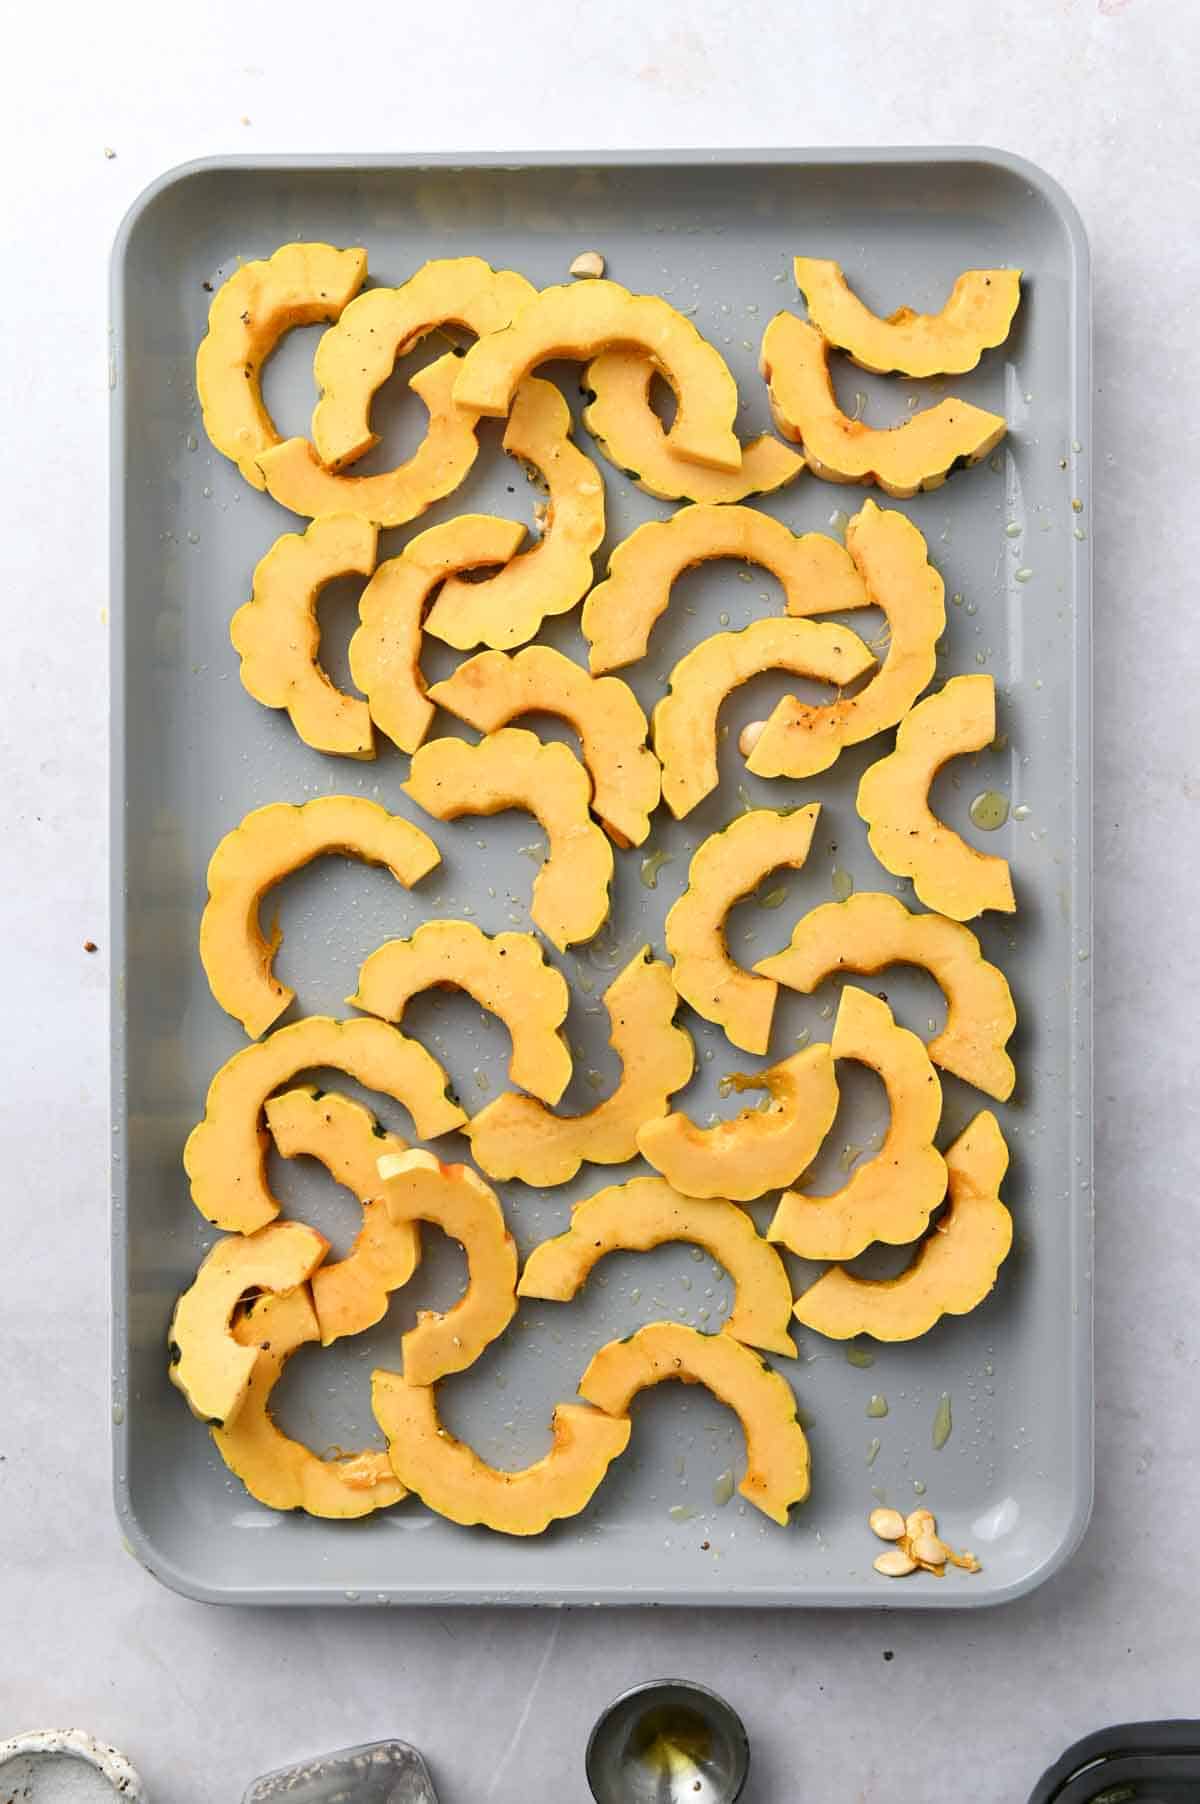 Sliced and uncooked delicata squash on a baking sheet.